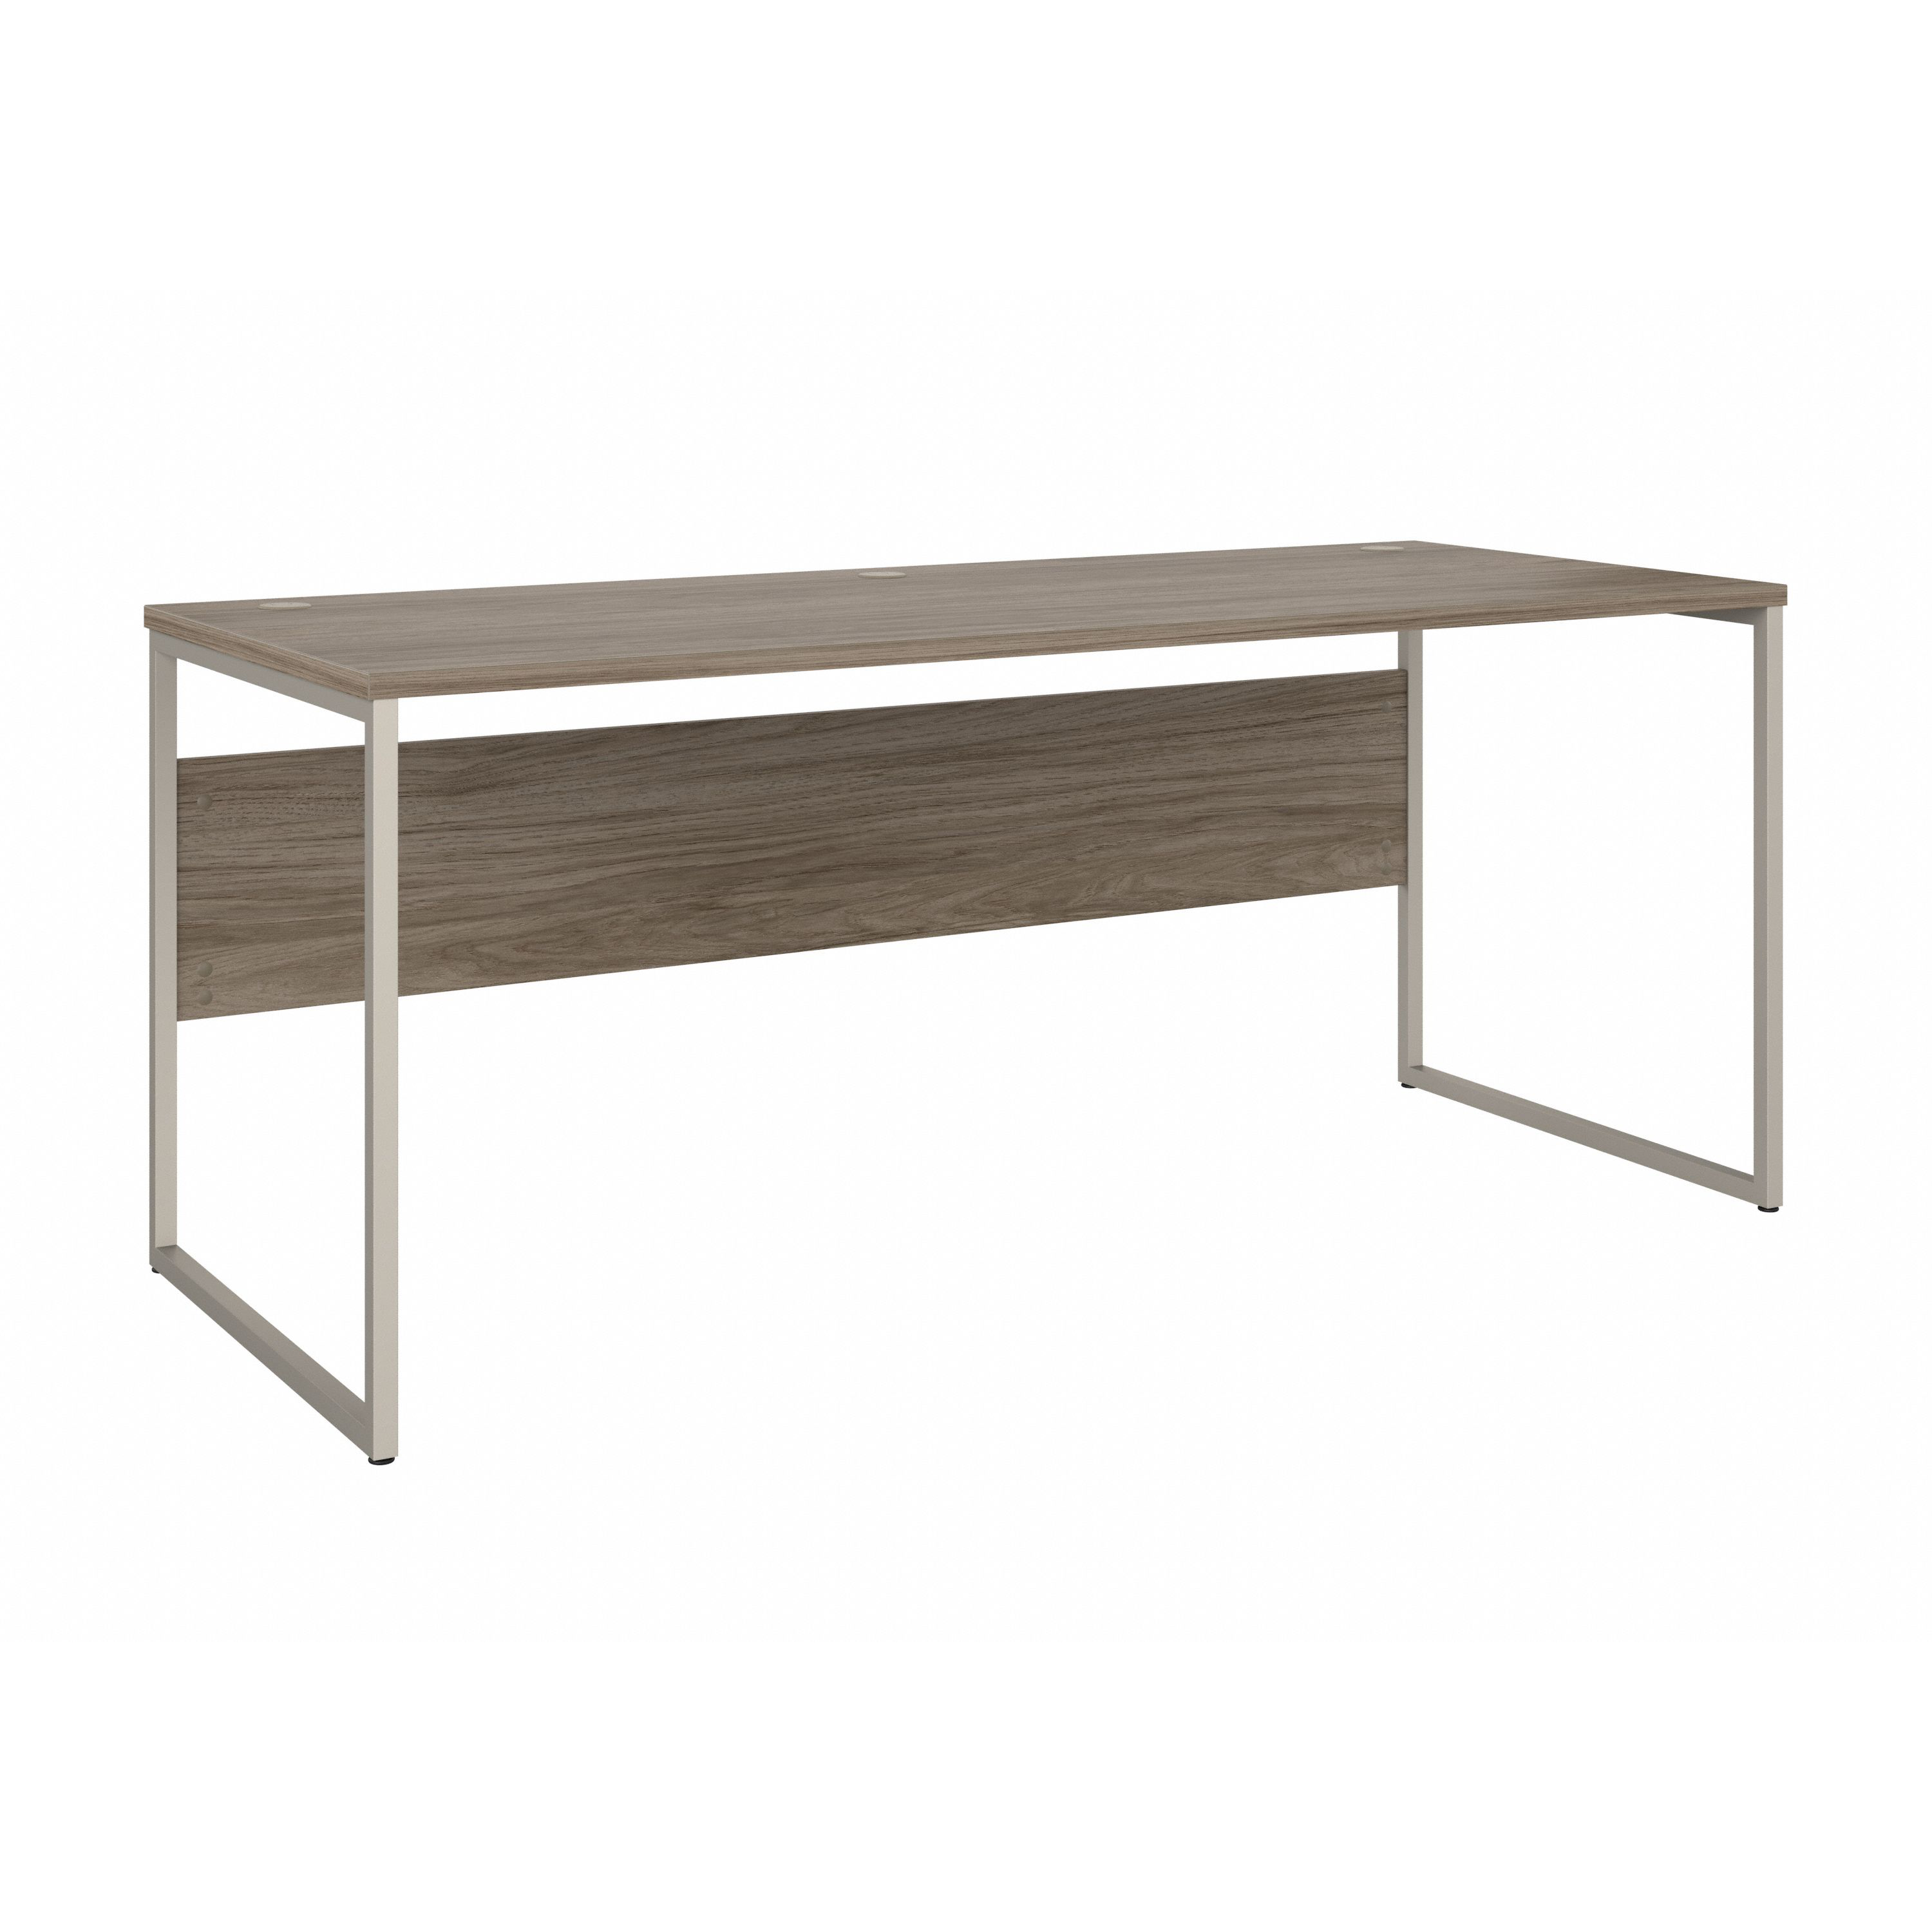 Shop Bush Business Furniture Hybrid 72W x 30D Computer Table Desk with Metal Legs 02 HYD373MH #color_modern hickory